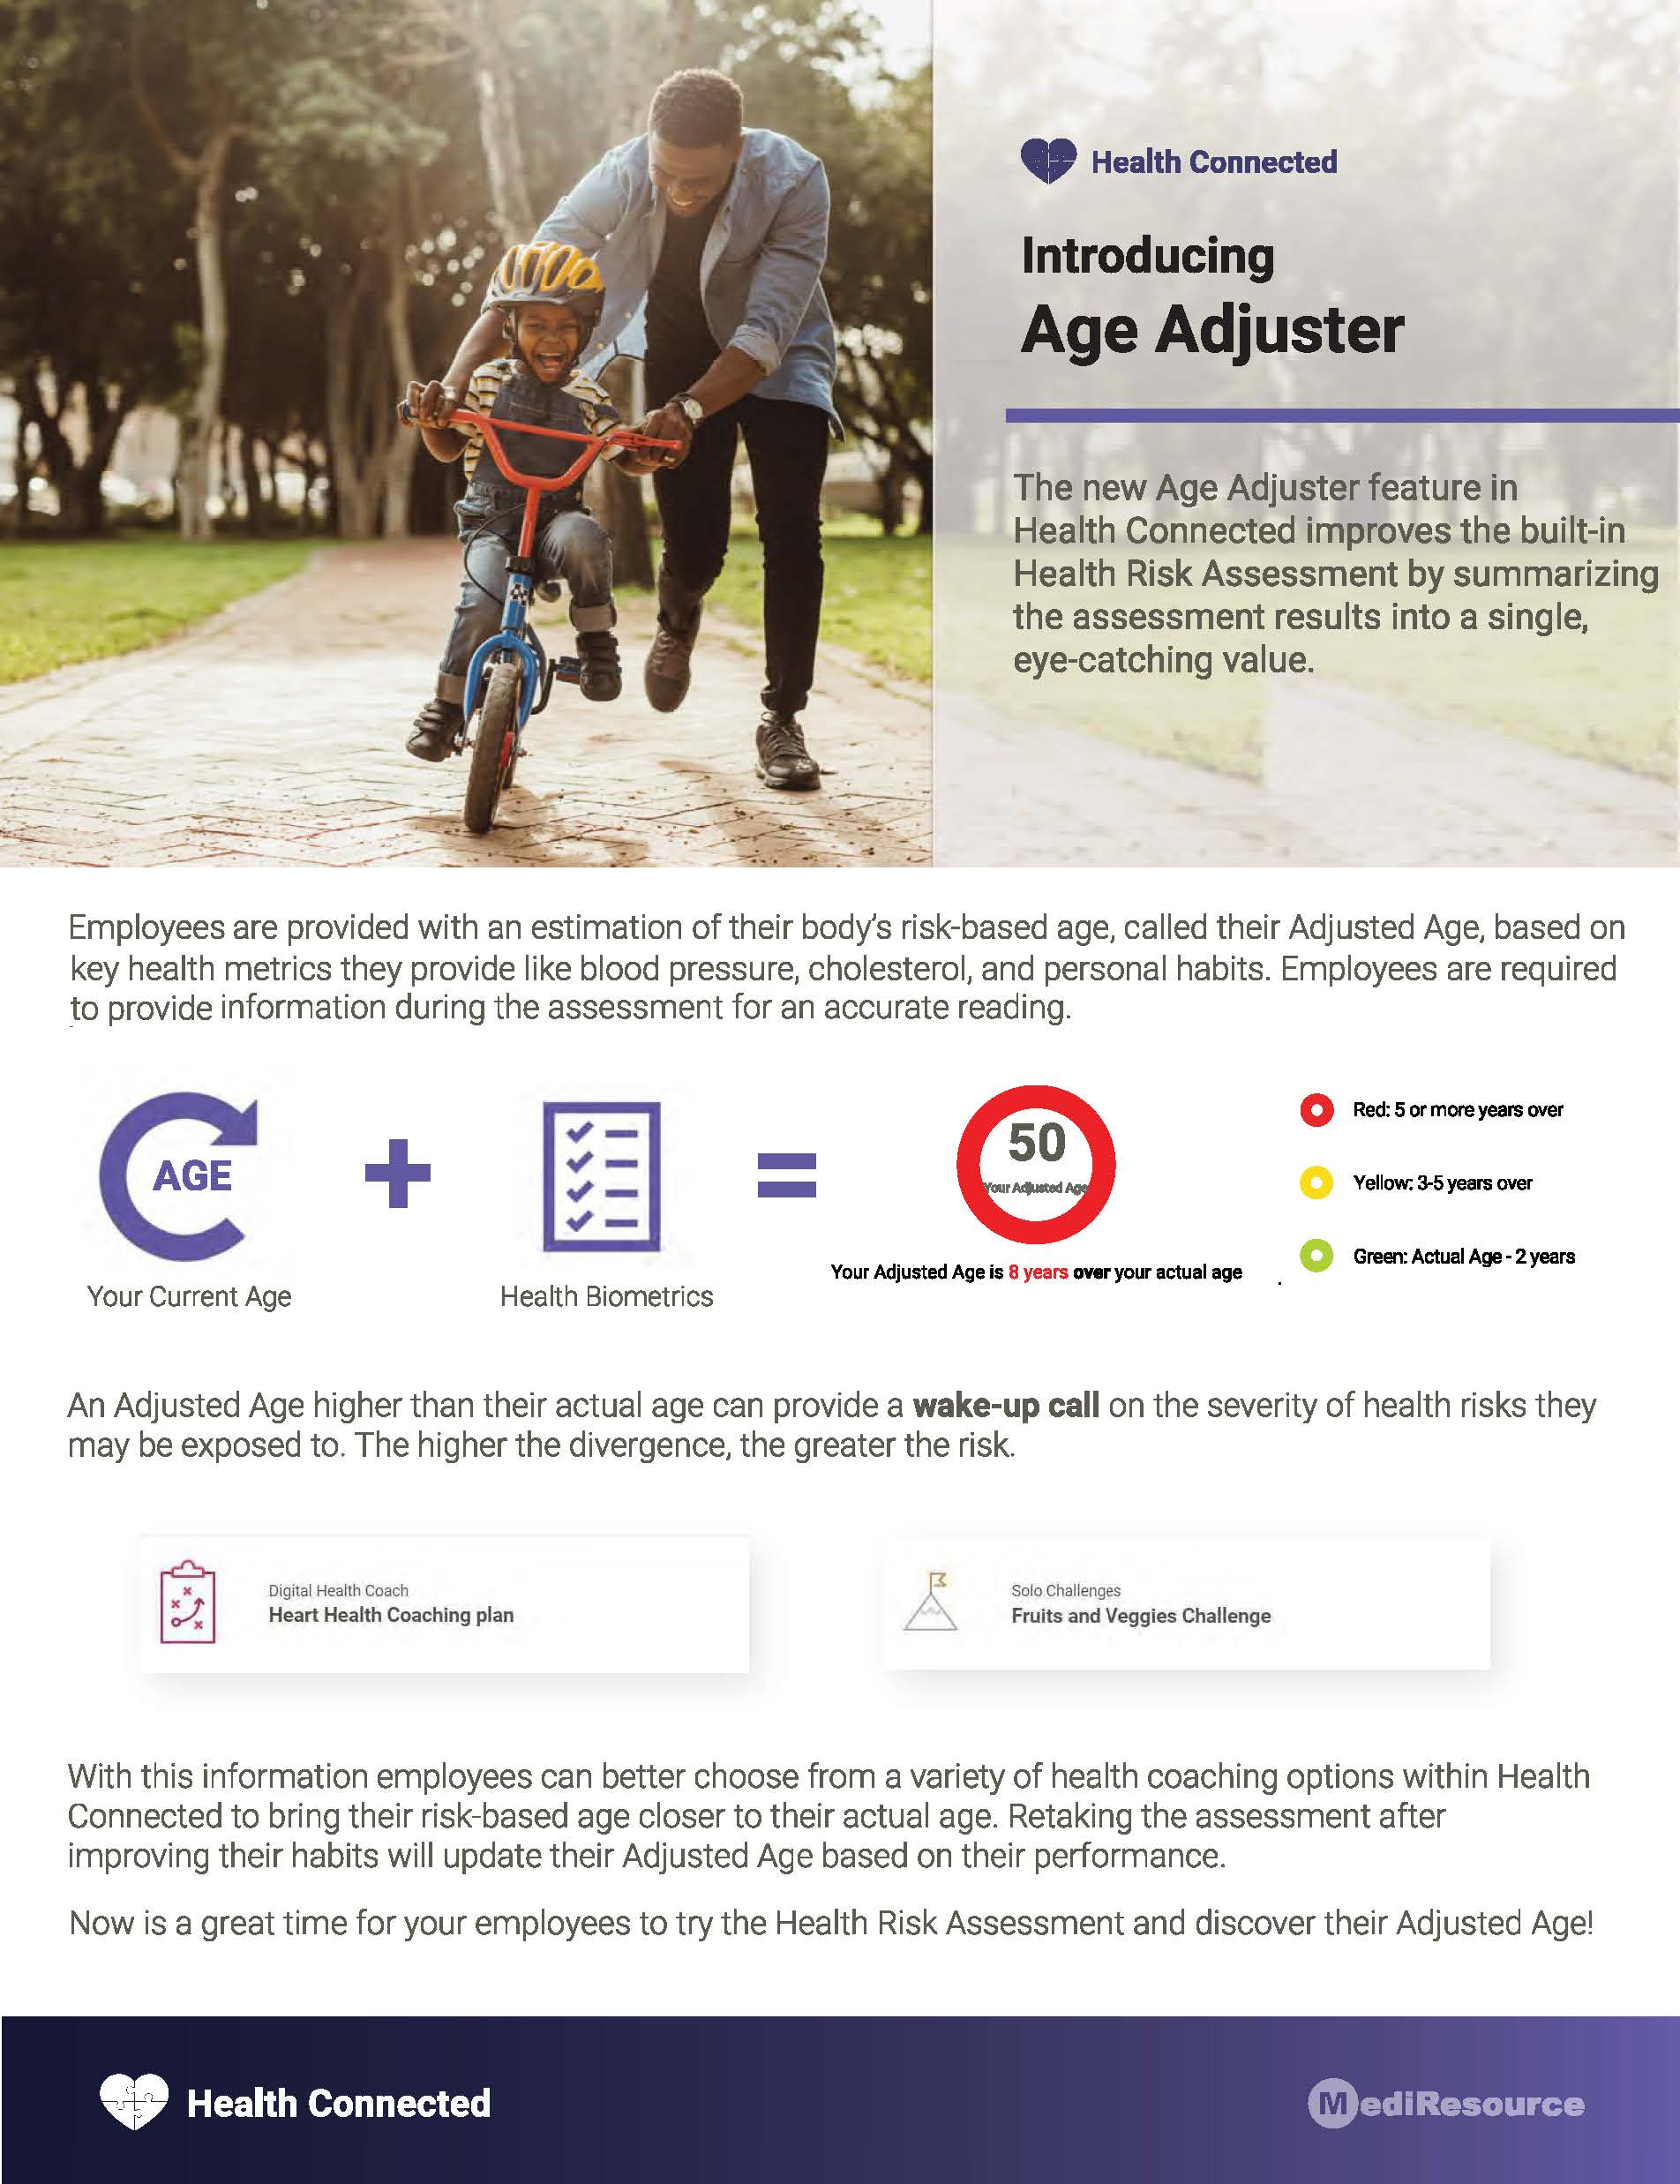 Health Connected New Feature - Age Adjuster